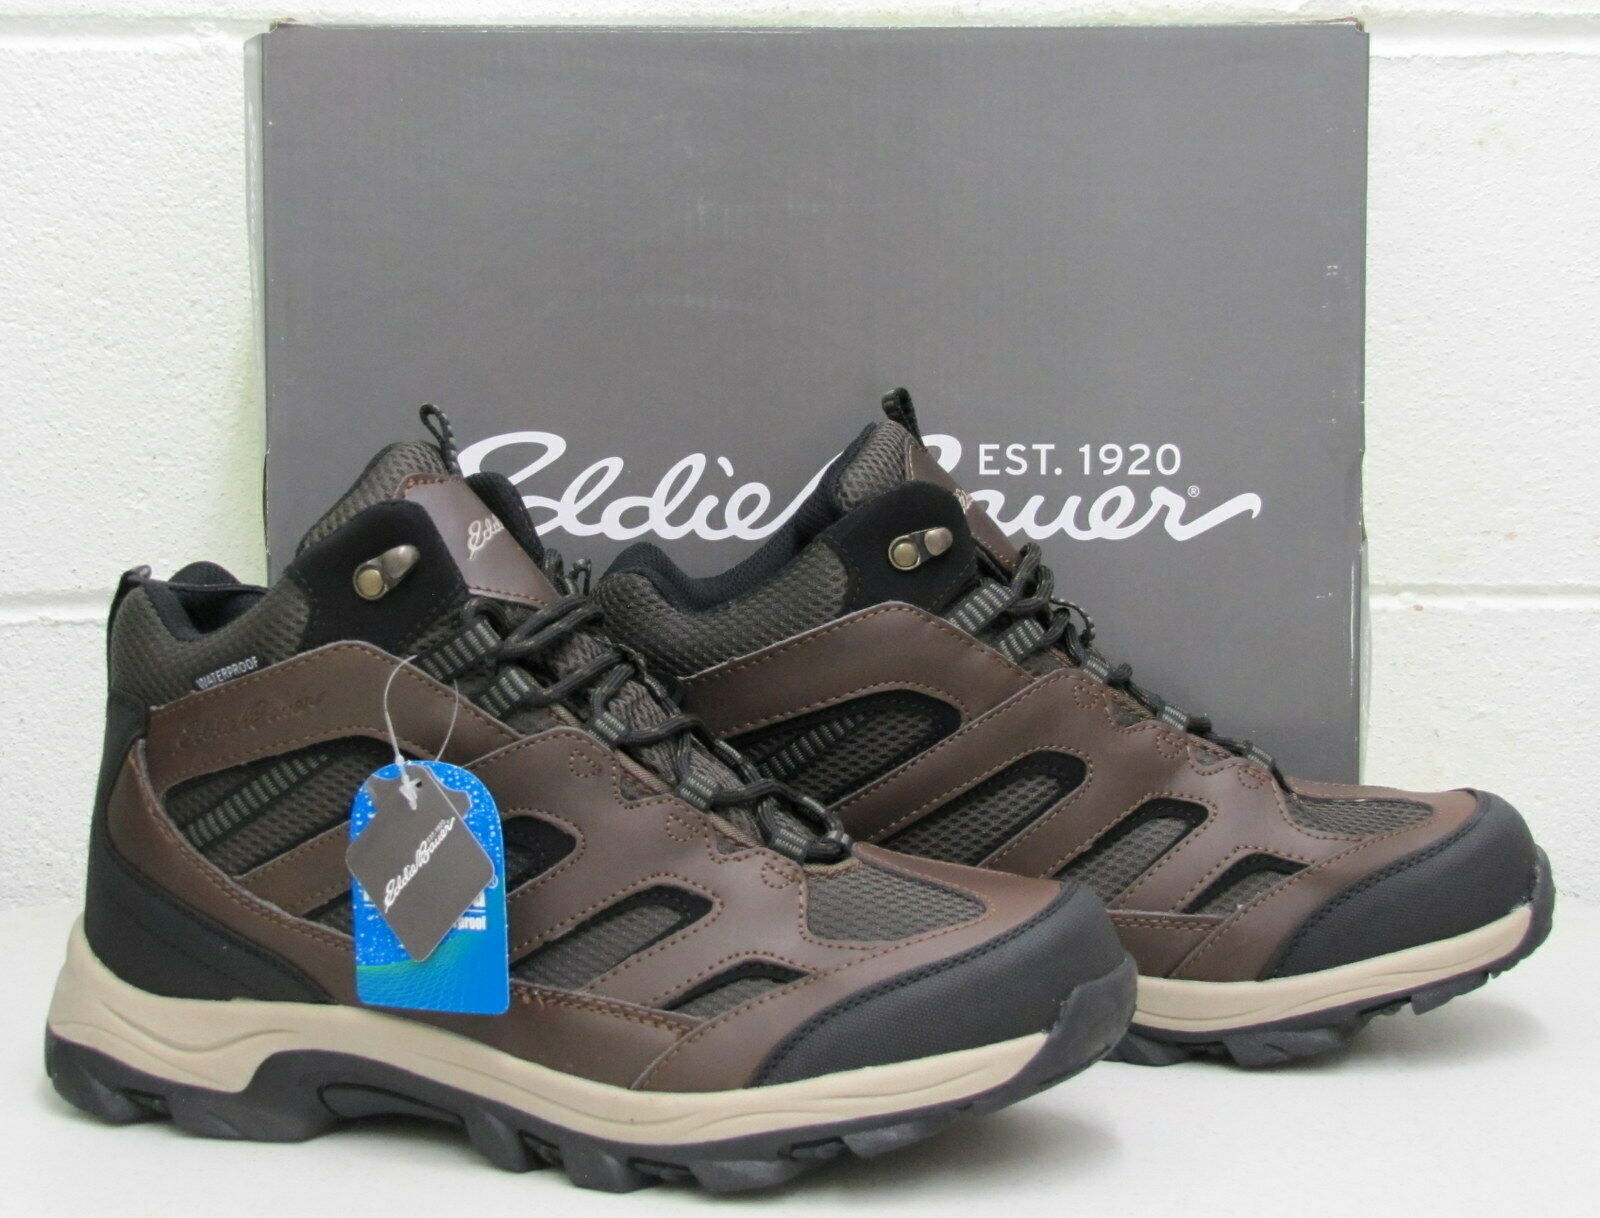 Eddie Bauer Men's Graham Hiking Boots Shoes Leather Waterproof Brown Size 11 New